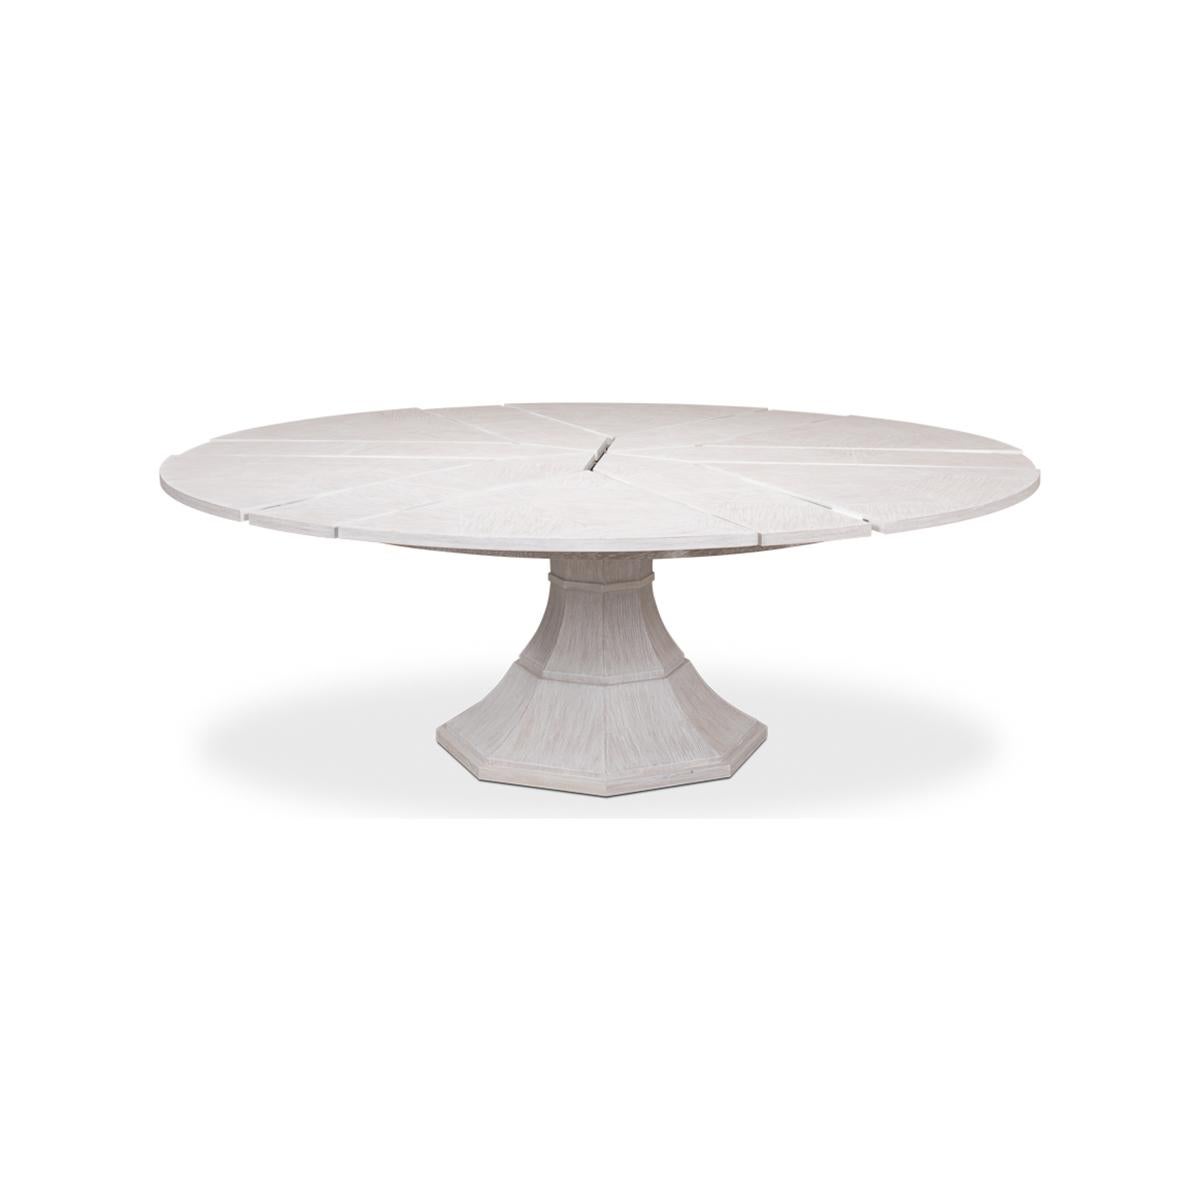 Modern Round Dining Table - Whitewash Oak In New Condition For Sale In Westwood, NJ